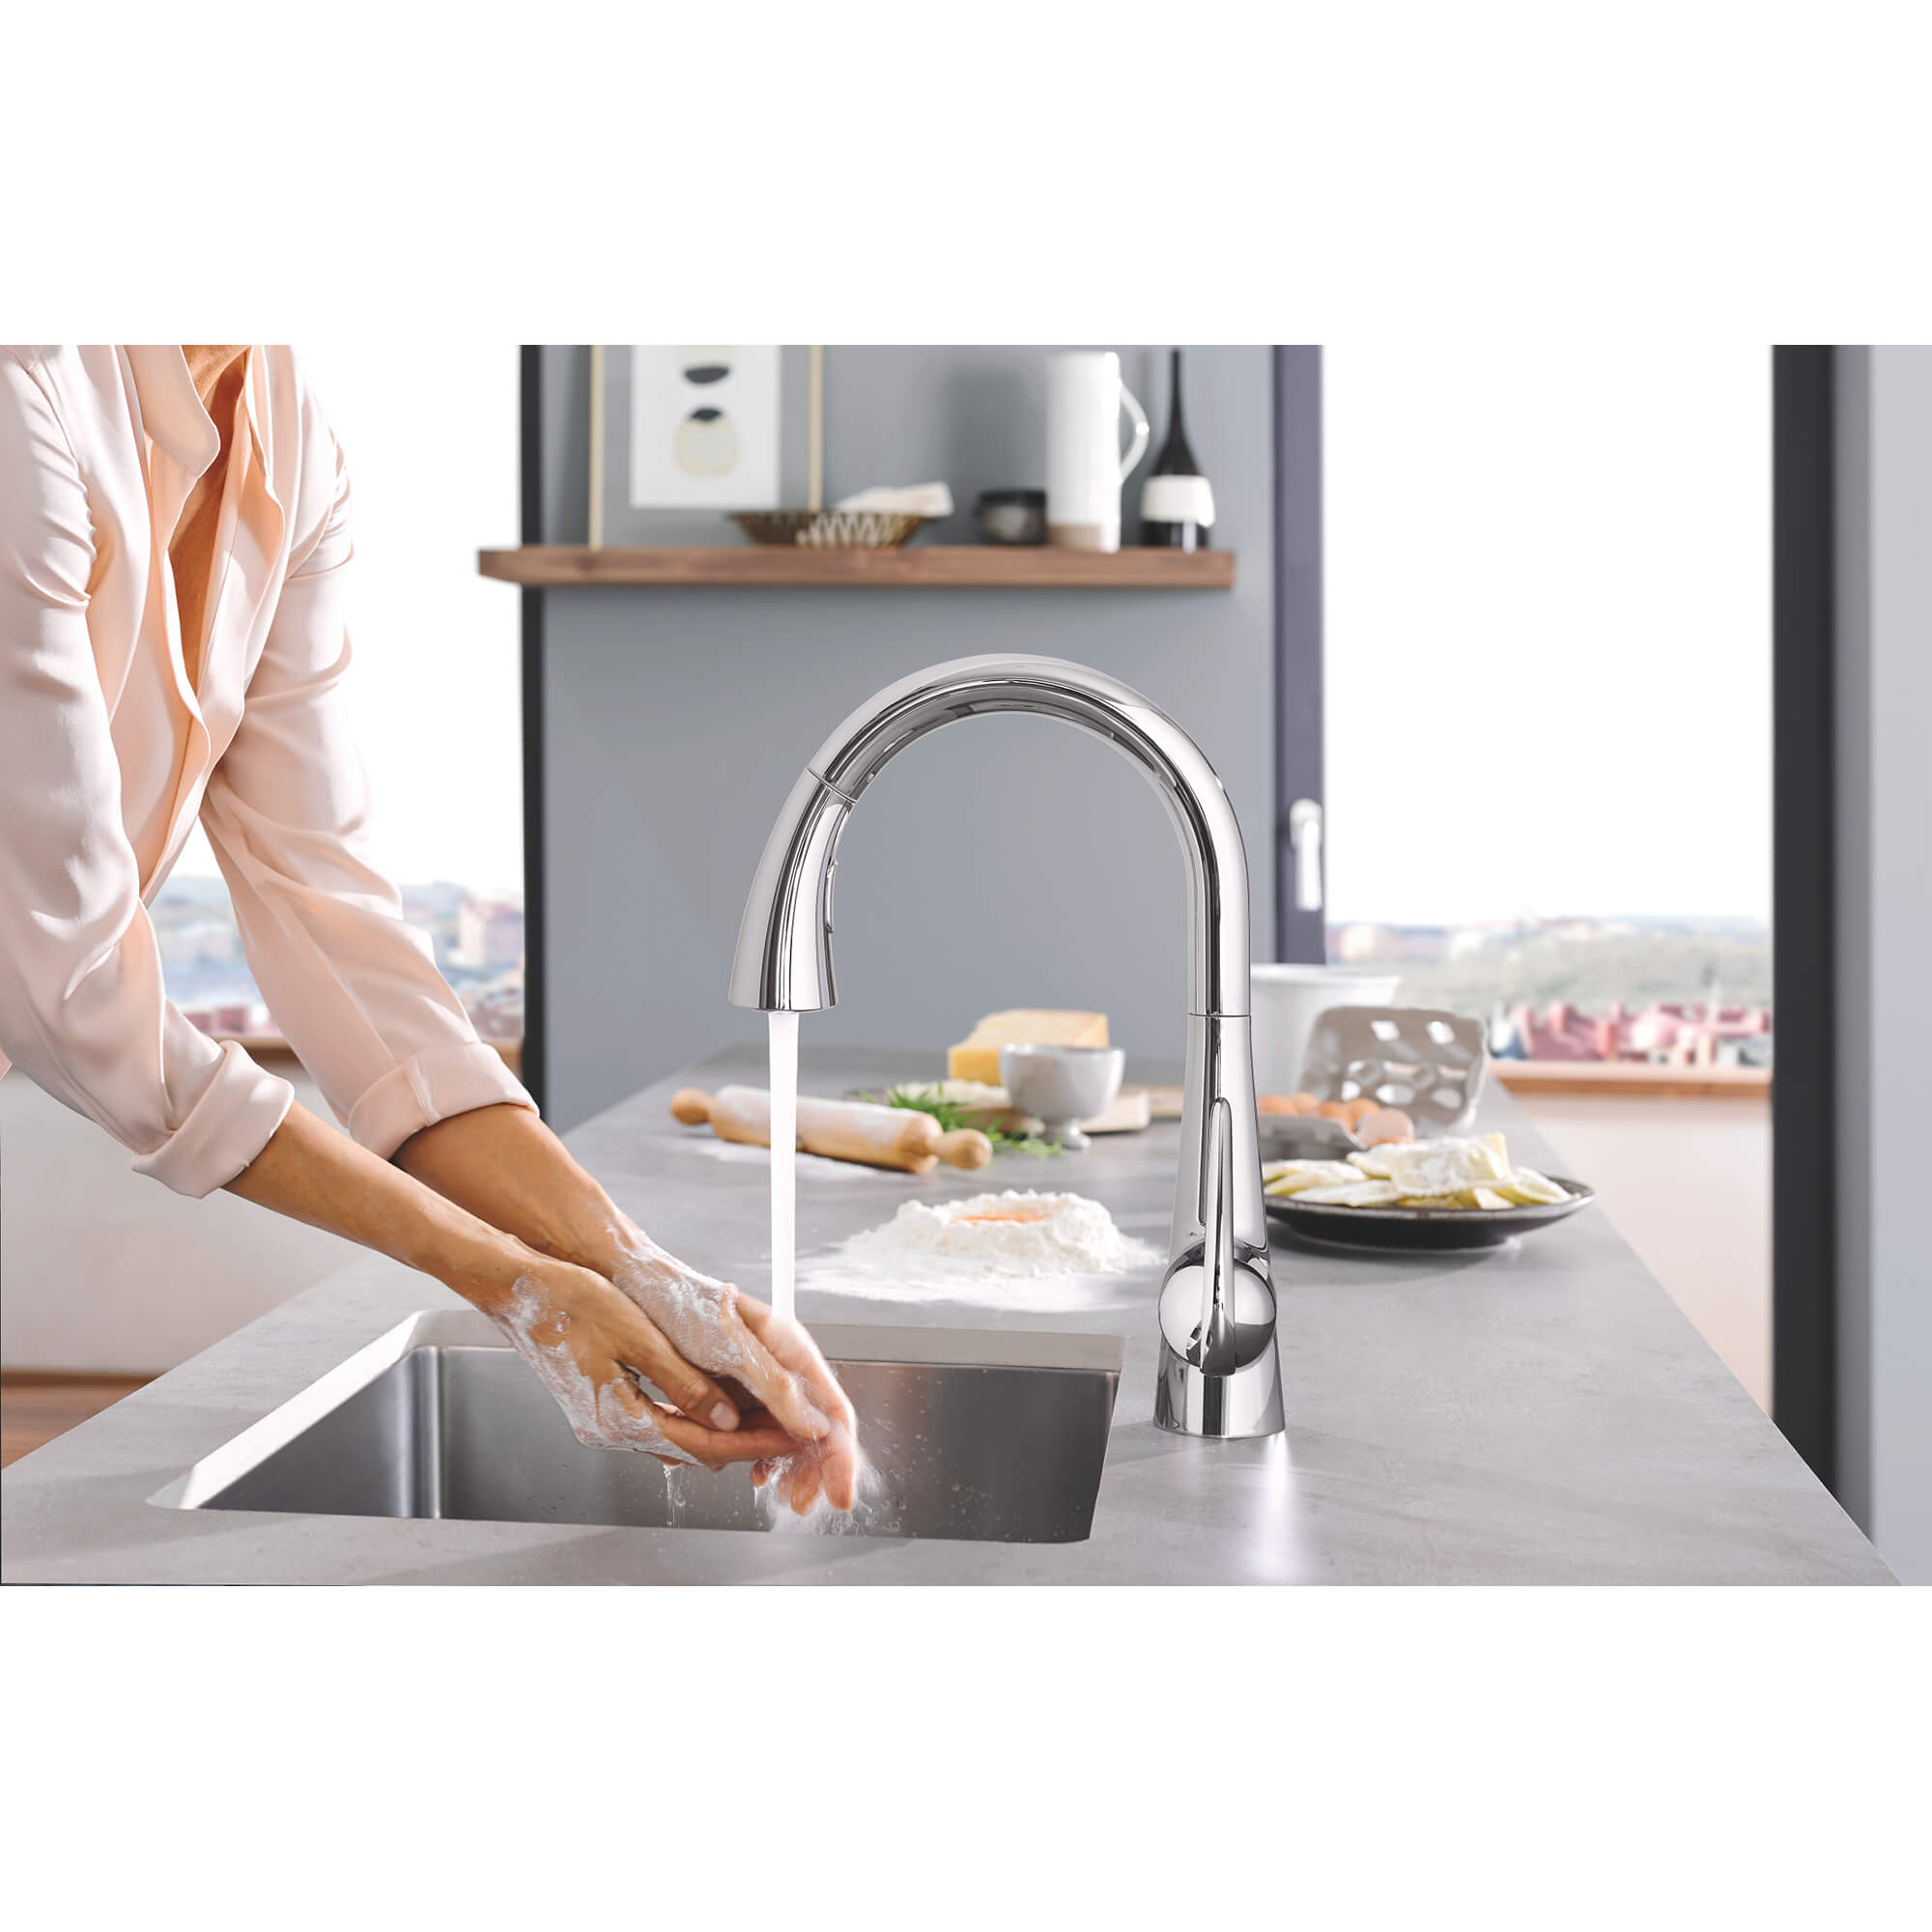 Touchless FootControl Single-Handle Pull Down Kitchen Faucet Dual Spray 1.75 GPM